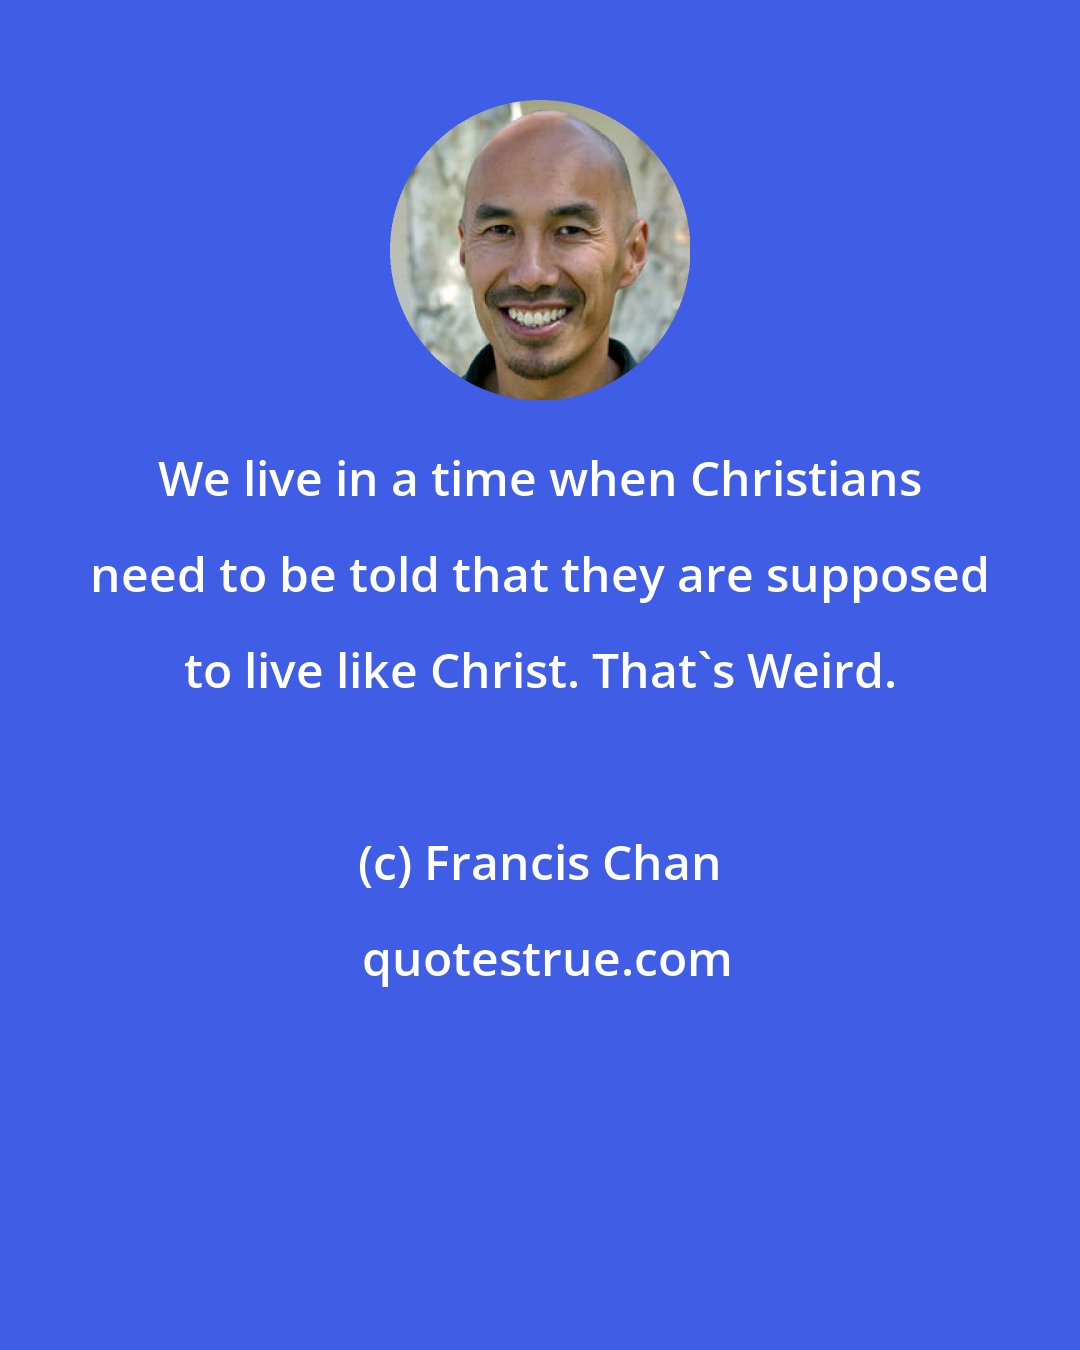 Francis Chan: We live in a time when Christians need to be told that they are supposed to live like Christ. That's Weird.